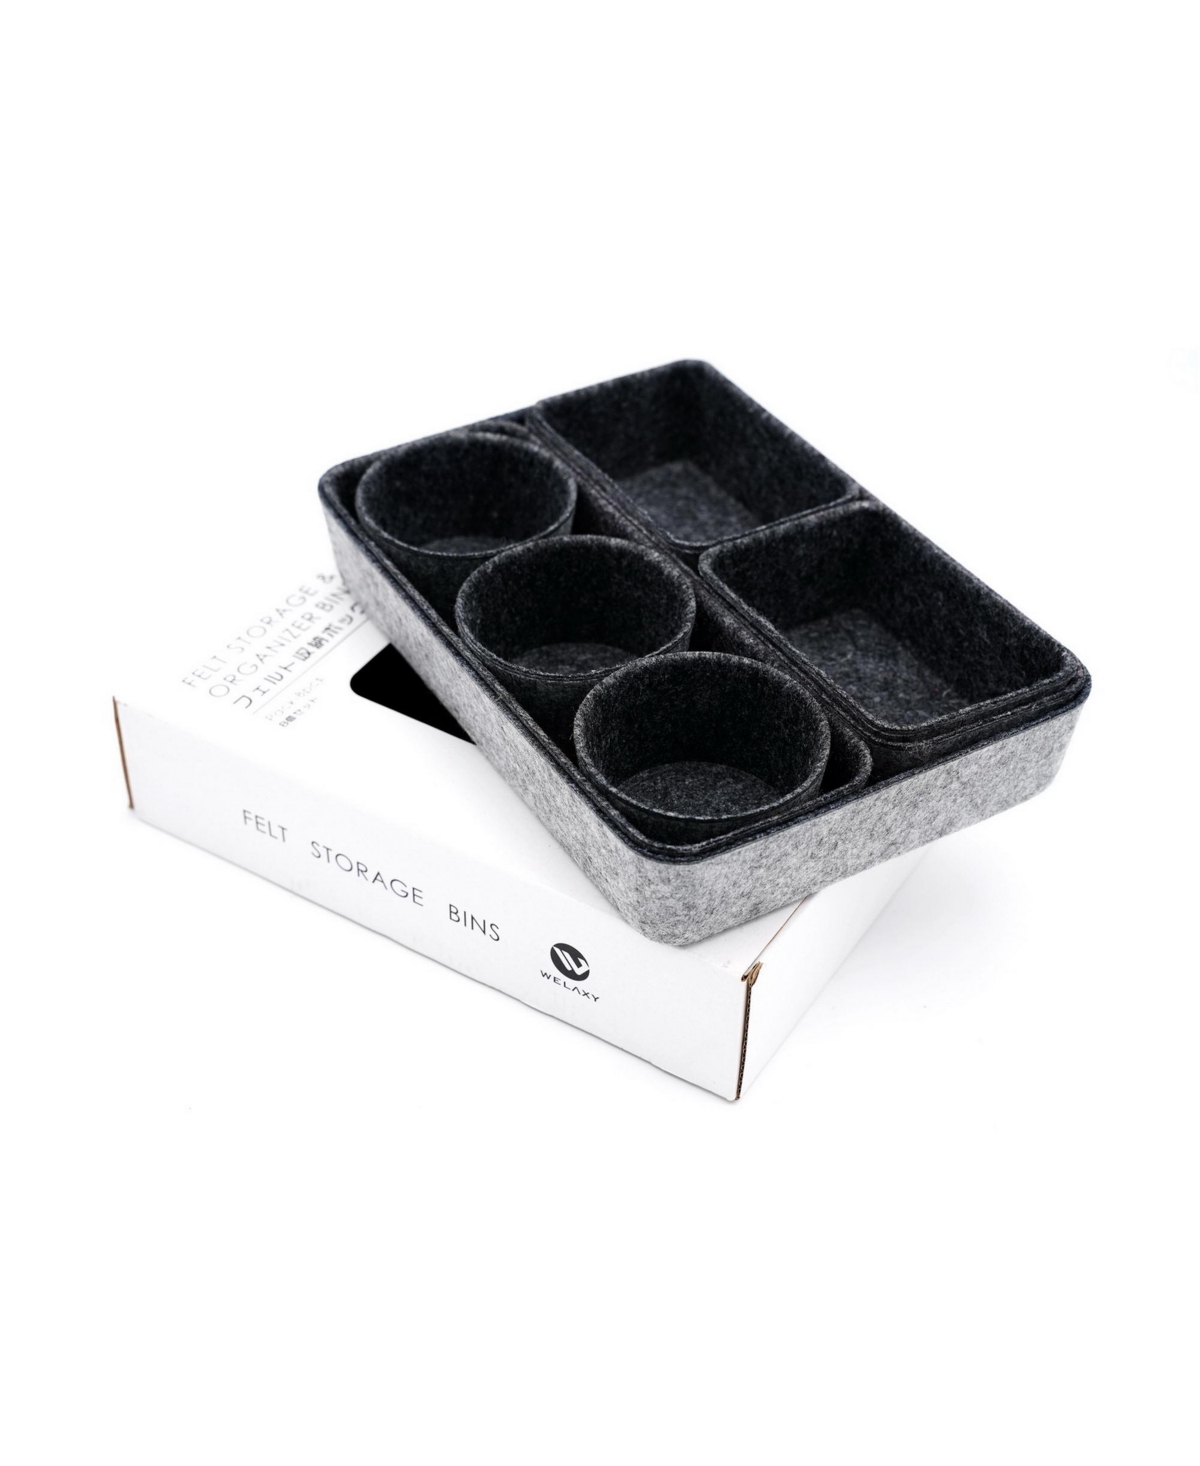 8 Piece Felt Drawer Organizer Set with Round Cups and Trays - Charcoal